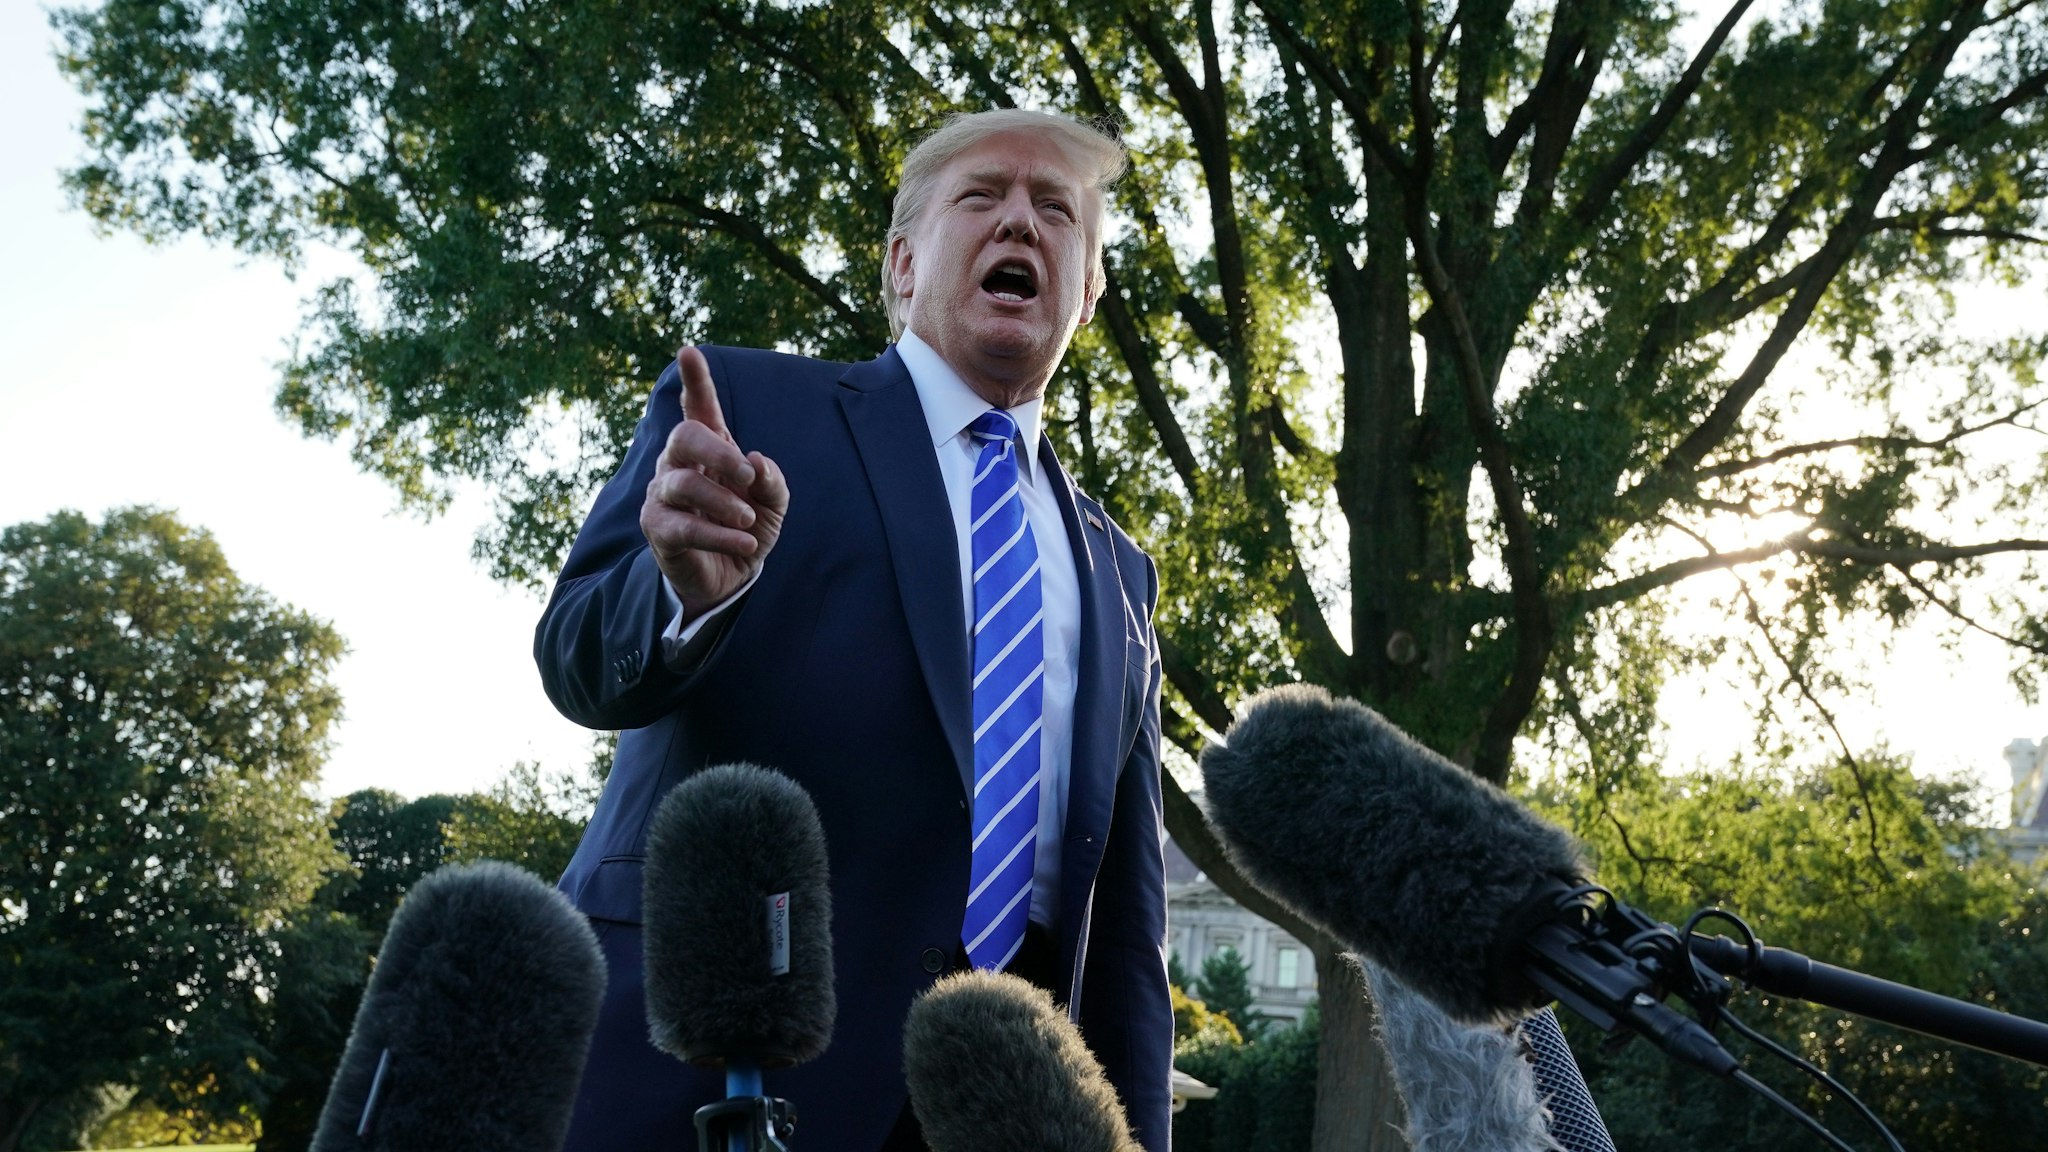 U.S. President Donald Trump speaks to members of the media prior to his departure for Camp David August 30, 2019 at the White House in Washington, DC.